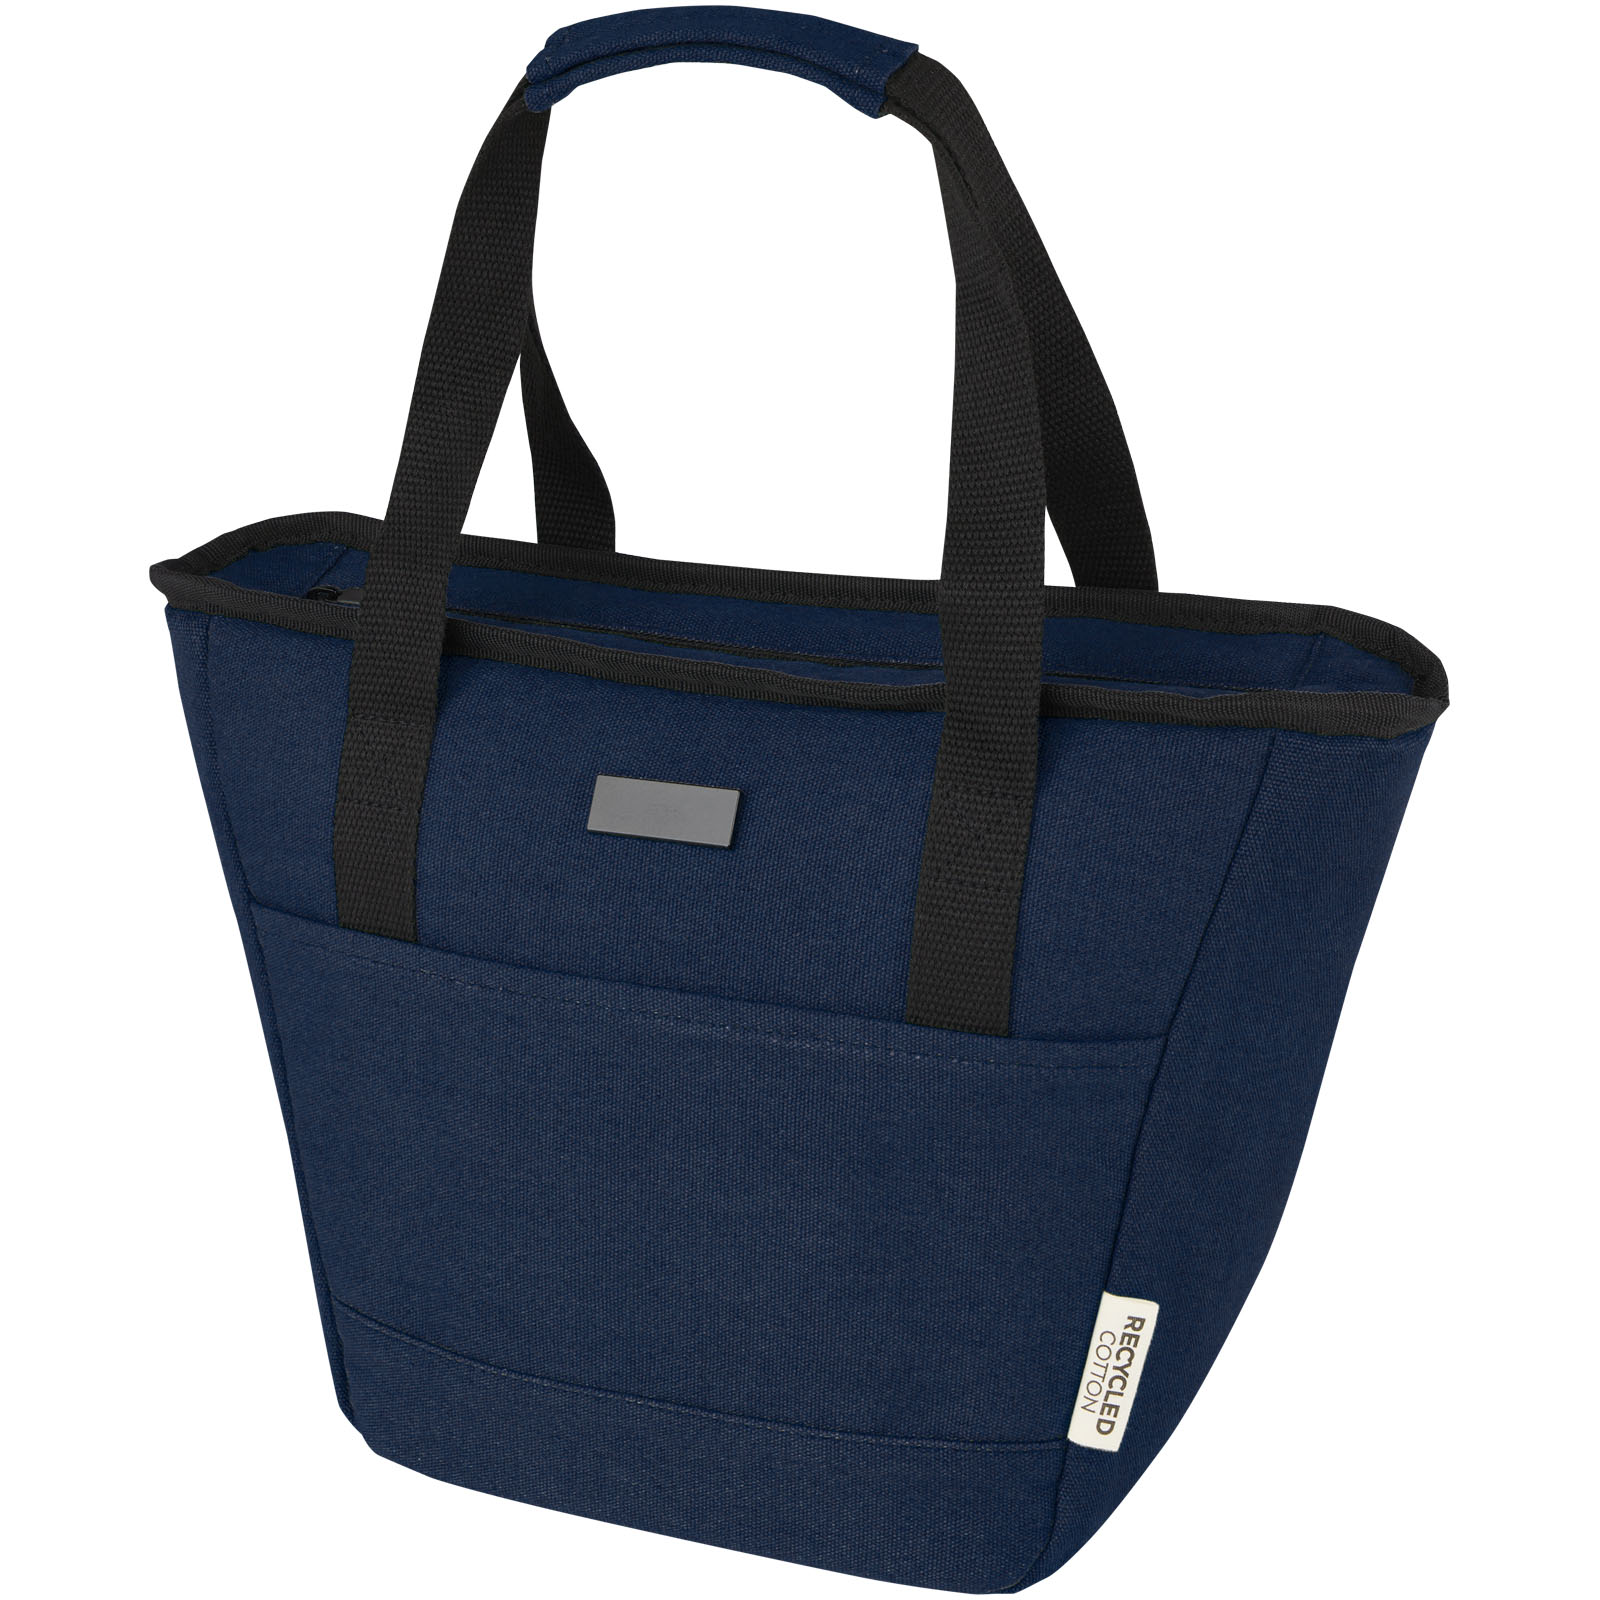 Cooler bags - Joey 9-can GRS recycled canvas lunch cooler bag 6L